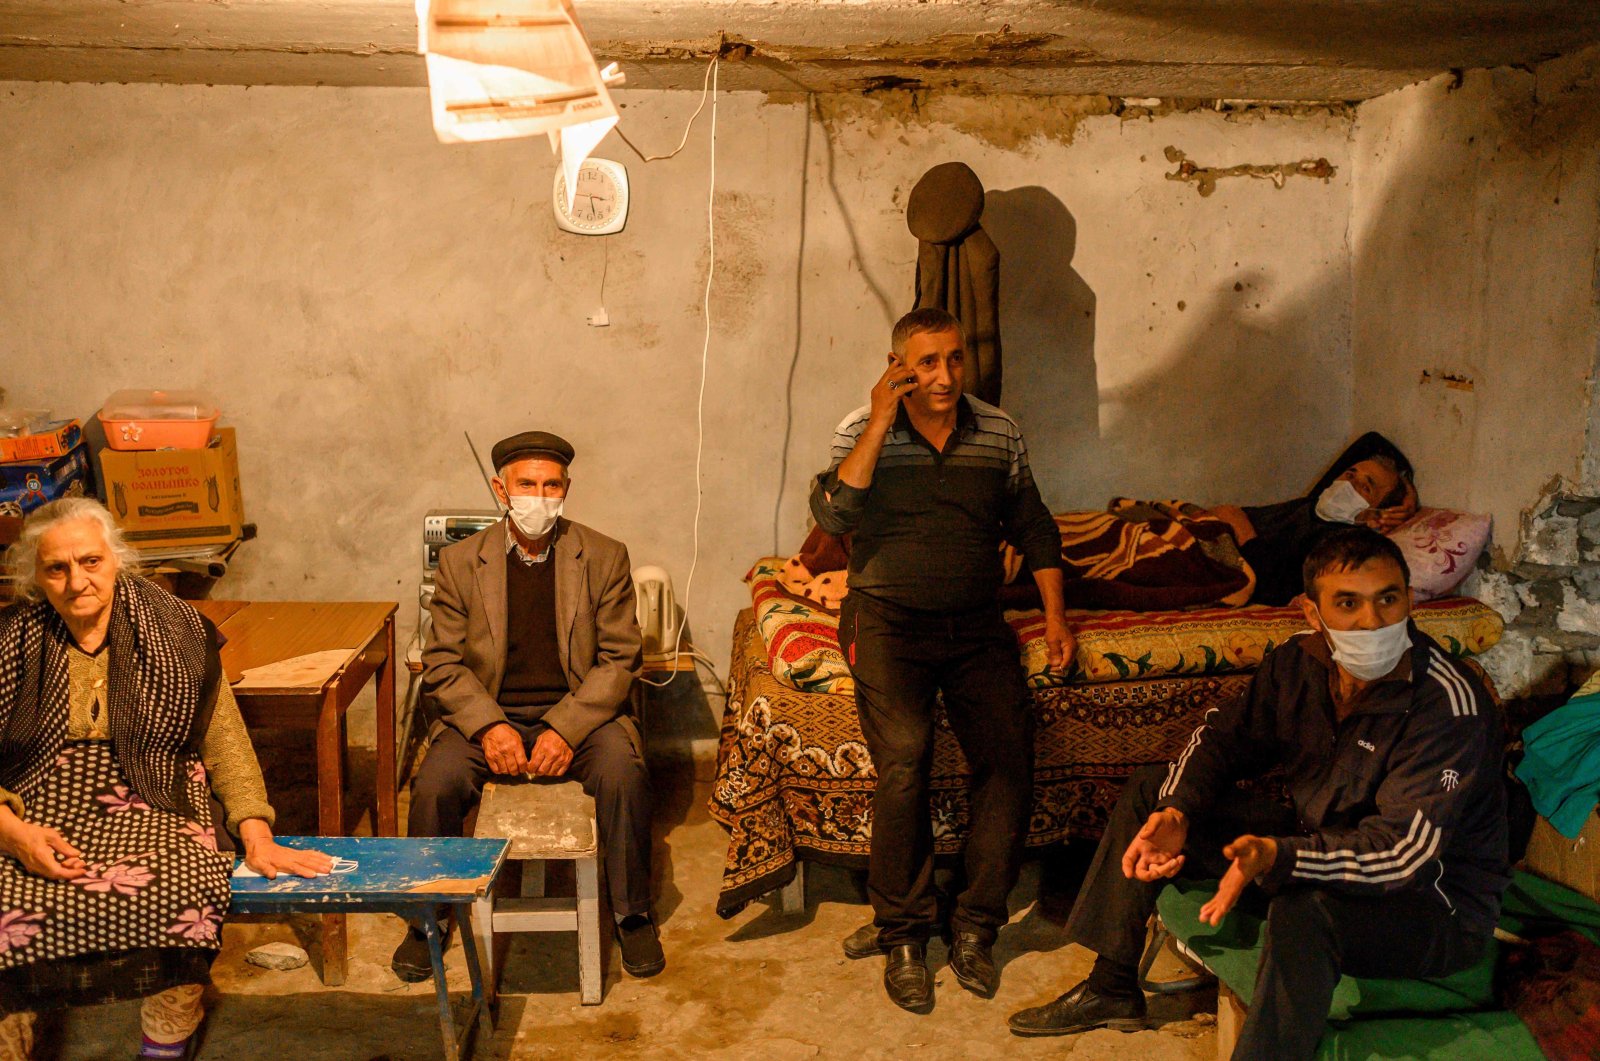 People shelter from Armenian shelling in a basement of a building in the city of Tartar, Azerbaijan, on Oct. 13, 2020, during the ongoing military conflict over Azerbaijan's illegally occupied region of Nagorno-Karabakh. (AFP Photo)